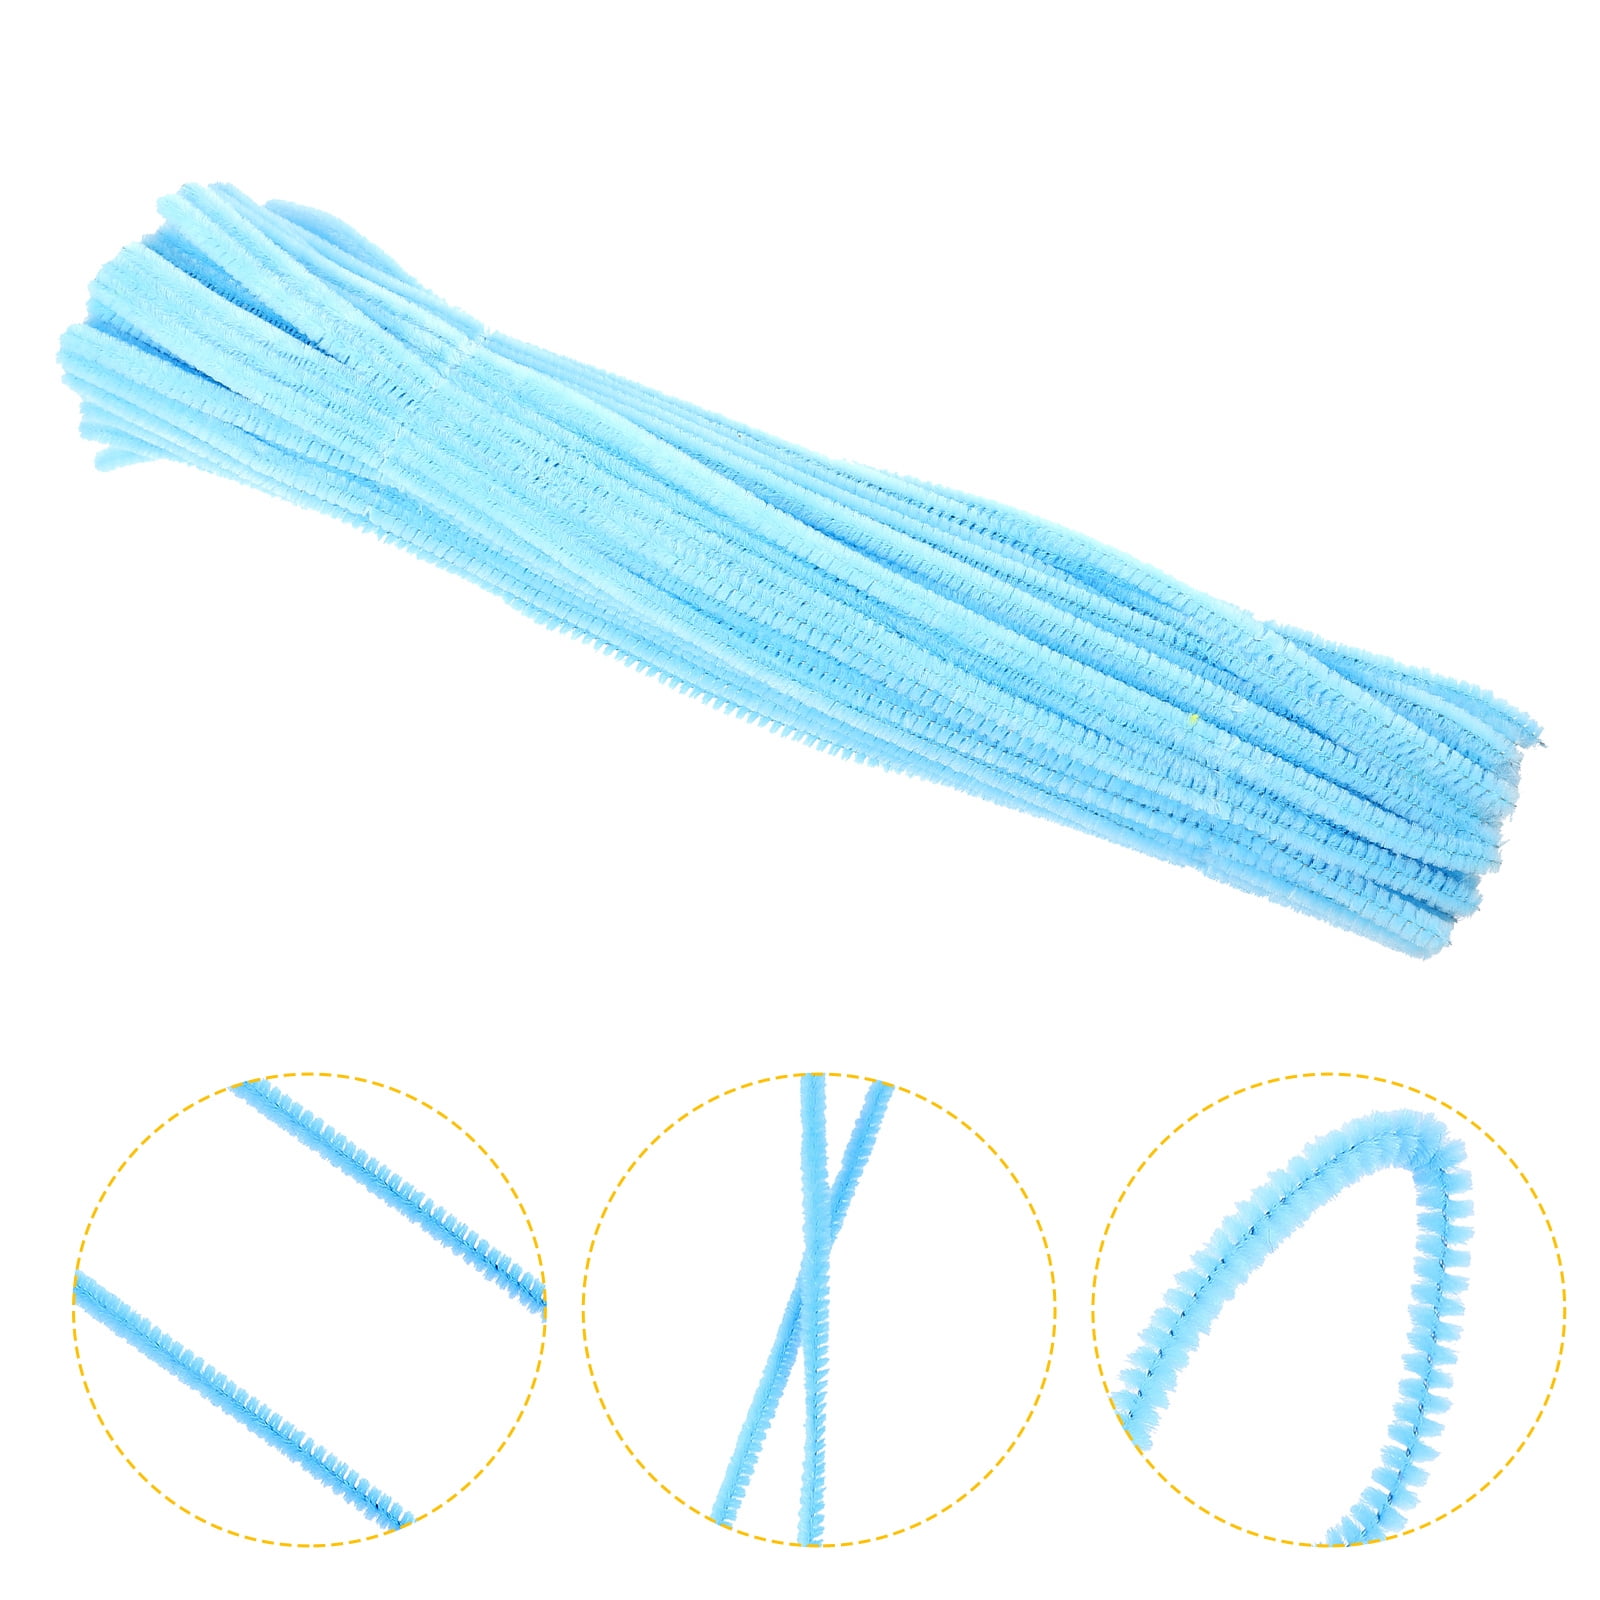 Nuolux Pipe Cleaners Fuzzy Sticks Chenillewax Craft String Sticks Yarn Christmas Bendy Fluffy Wire Bendable Wire Crafting, Size: 30.5X0.5CM